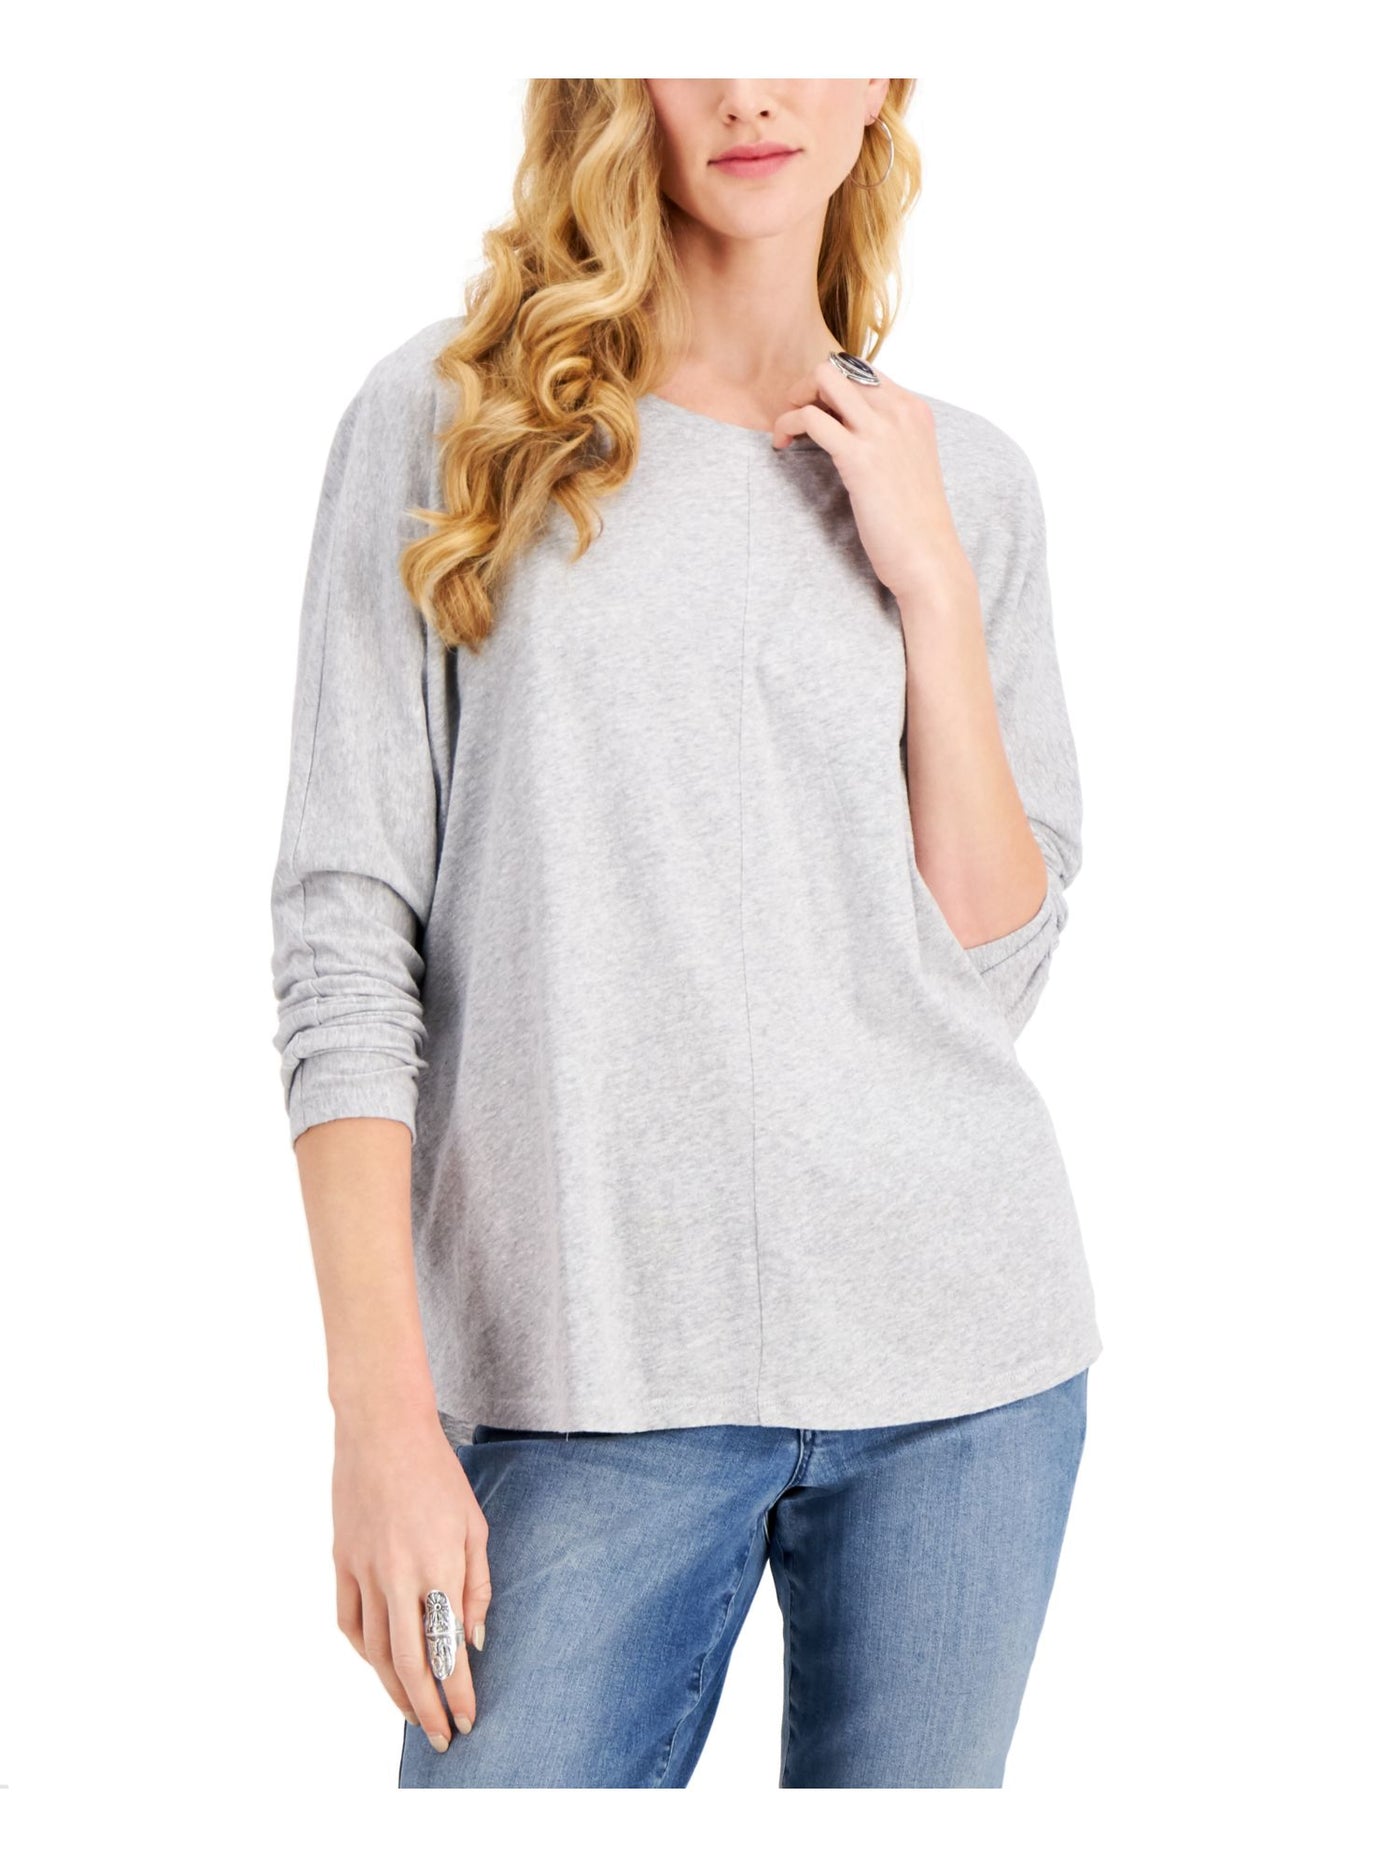 STYLE & COMPANY Womens Gray Striped Dolman Sleeve Scoop Neck Top S